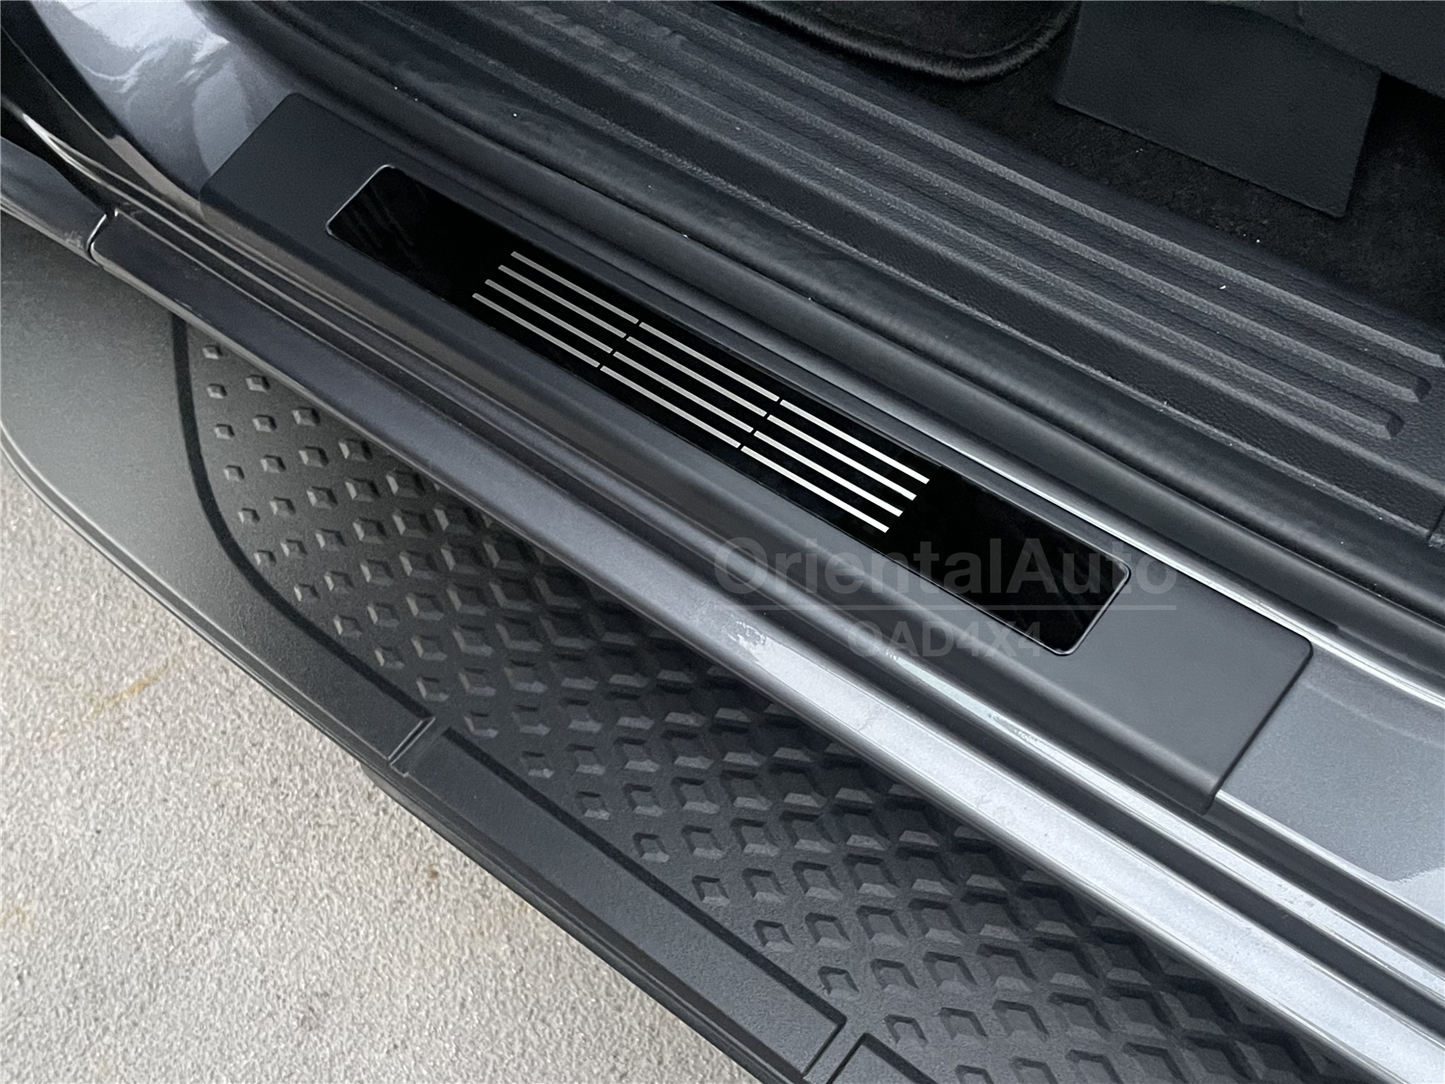 Black Door Sill Protector for Ford Ranger Dual Cab Next-Gen 2022-Onwards Stainless Steel Scuff Plates Door Sills Protector